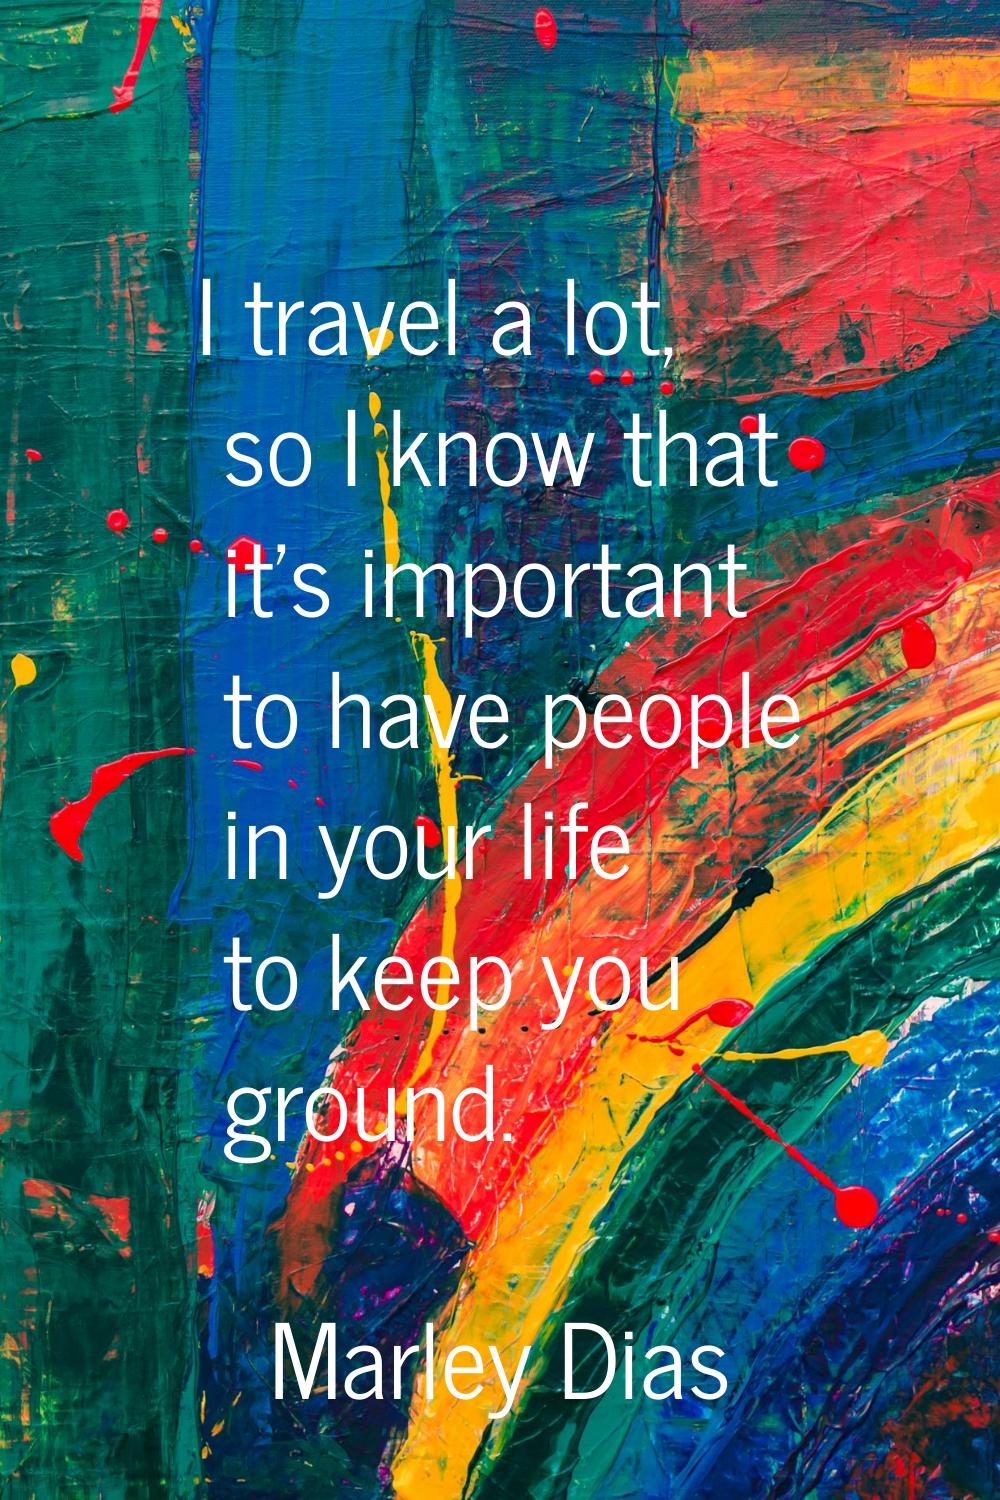 I travel a lot, so I know that it's important to have people in your life to keep you ground.